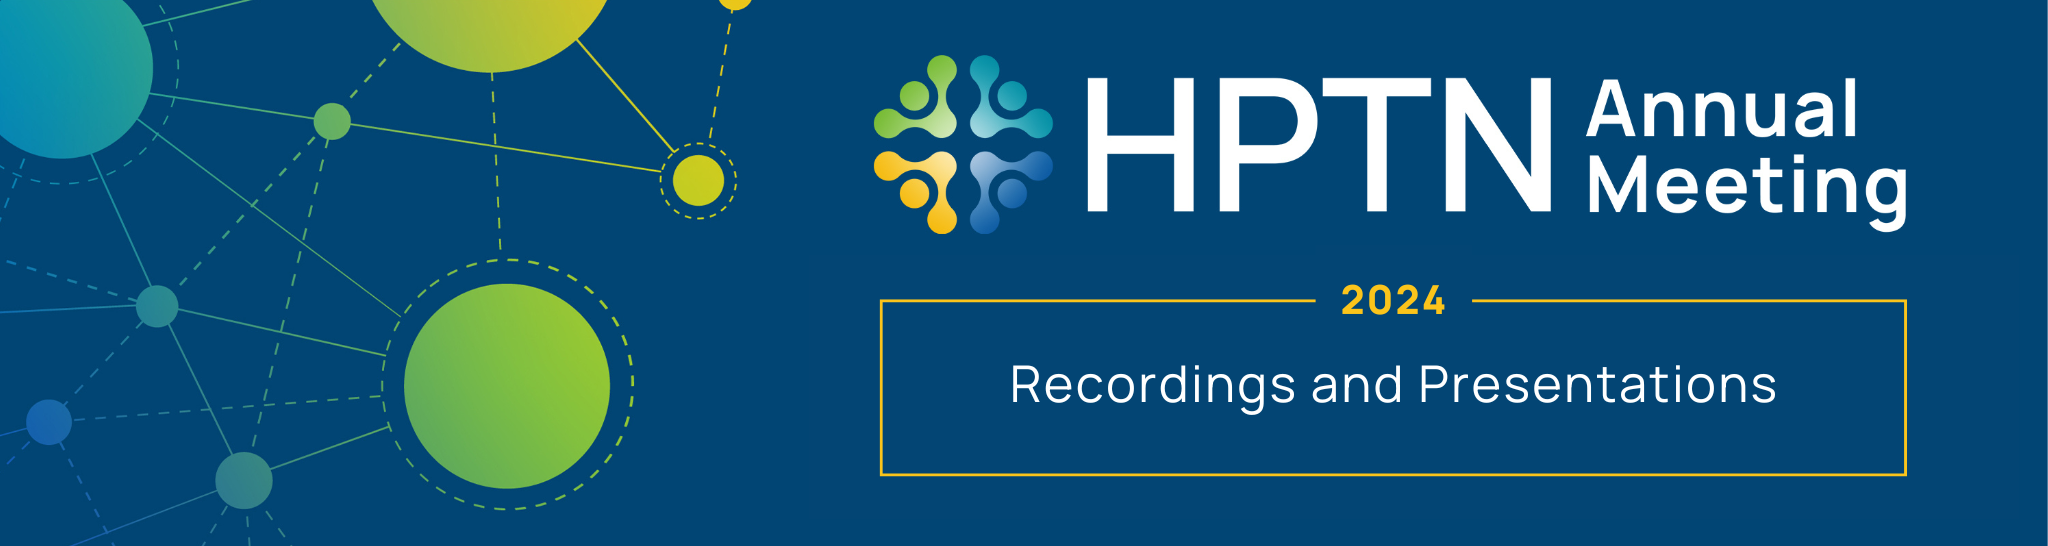 2024 HPTN Annual Meeting Recordings and Presentations